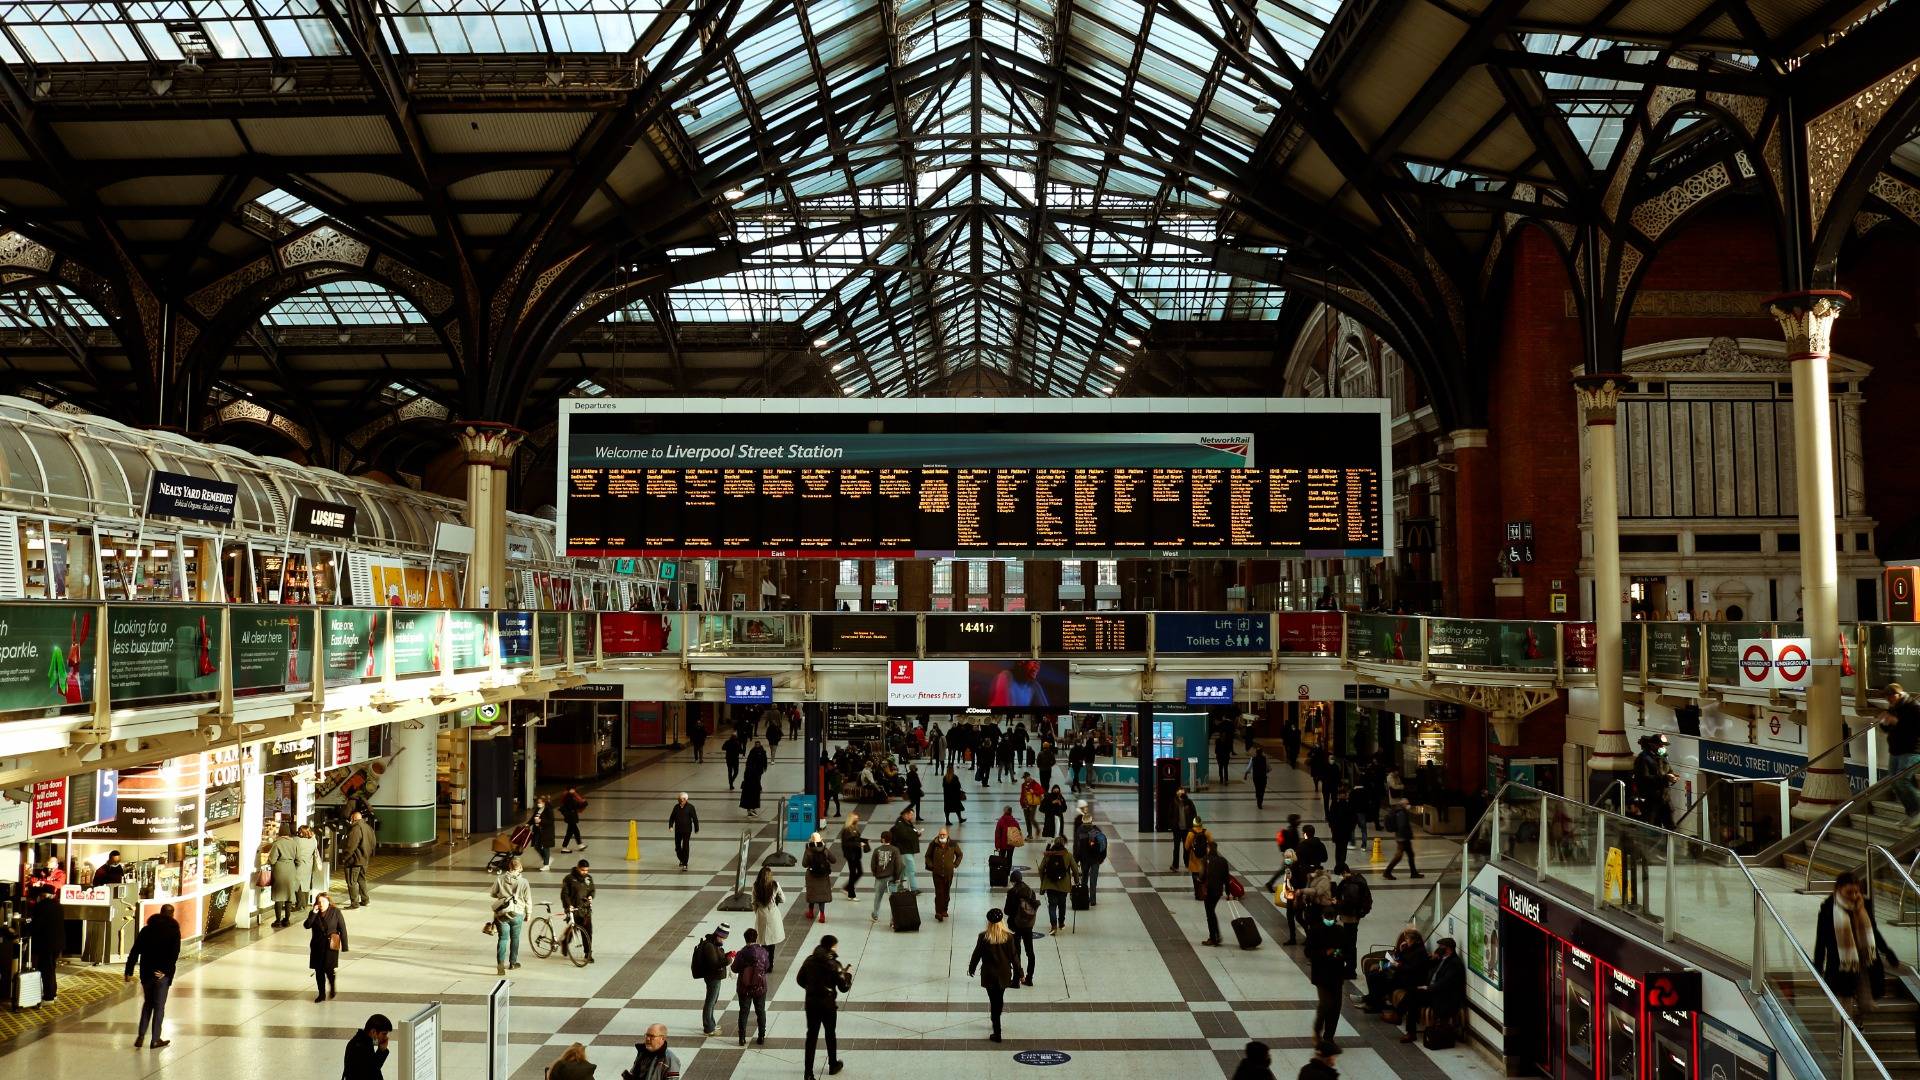 Liverpool Street Station in London